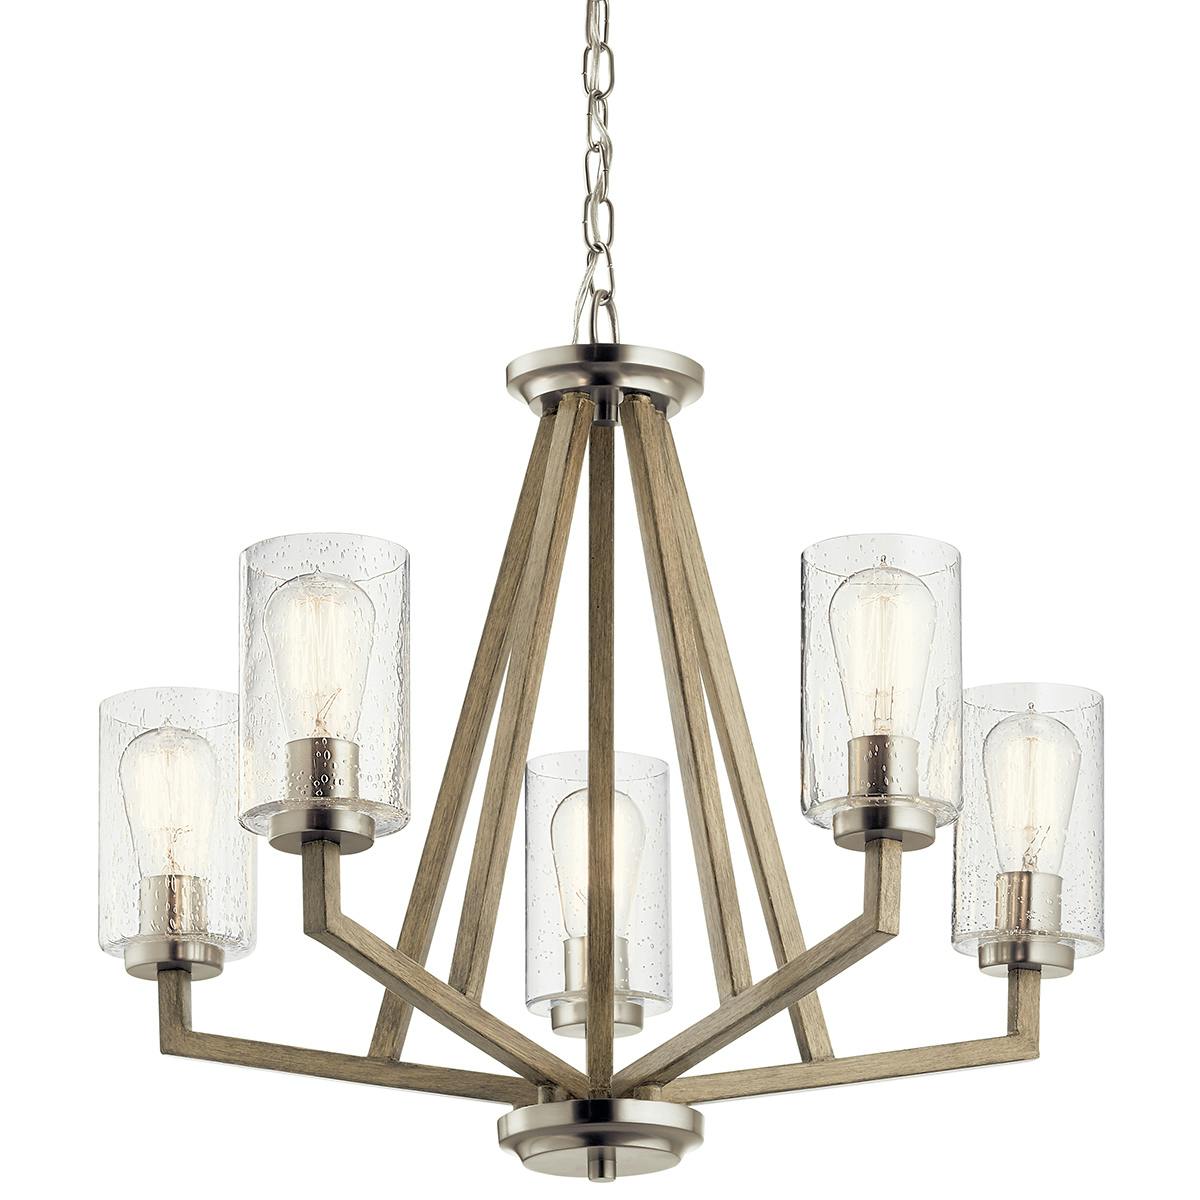 Close up view of the Deryn 5 Light Chandelier Antique Grey on a white background